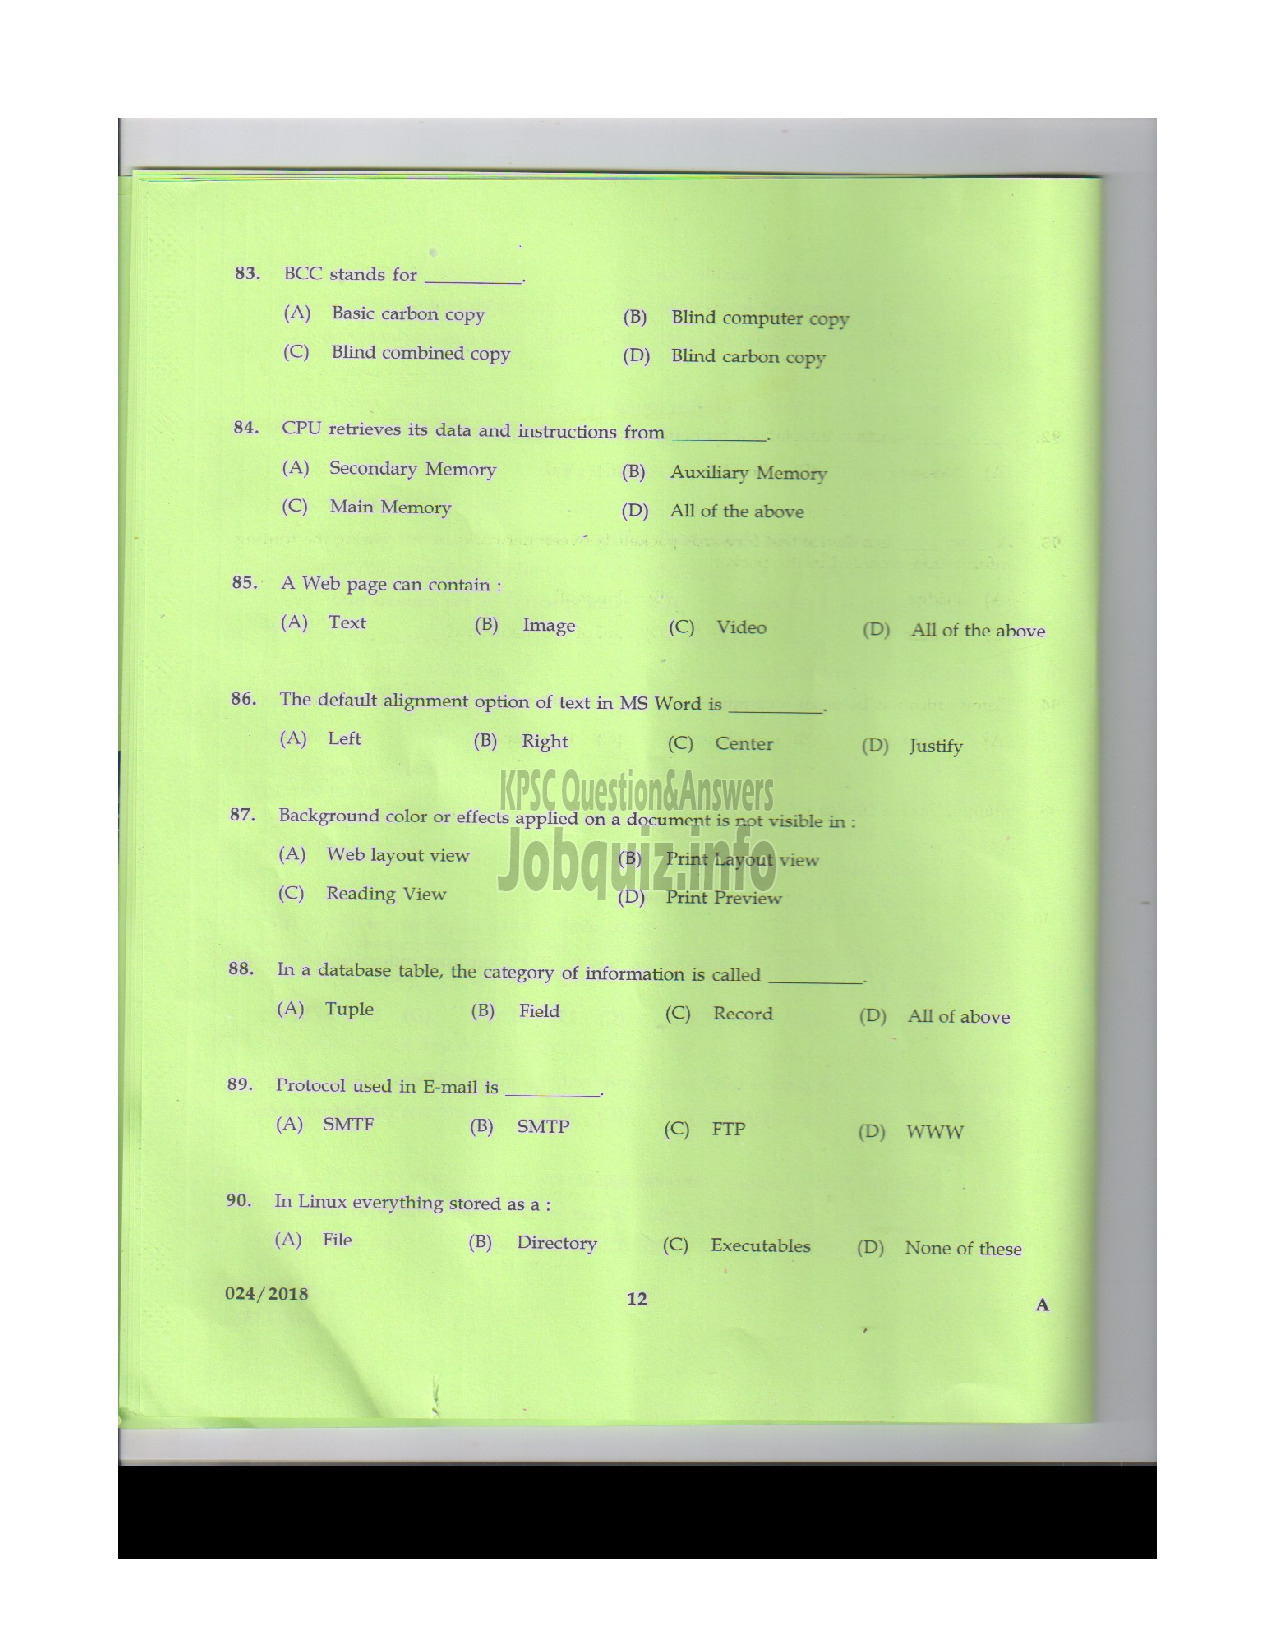 Kerala PSC Question Paper - POLICE CONSTABLE TELECOMMUNICATIONS POLICE-11